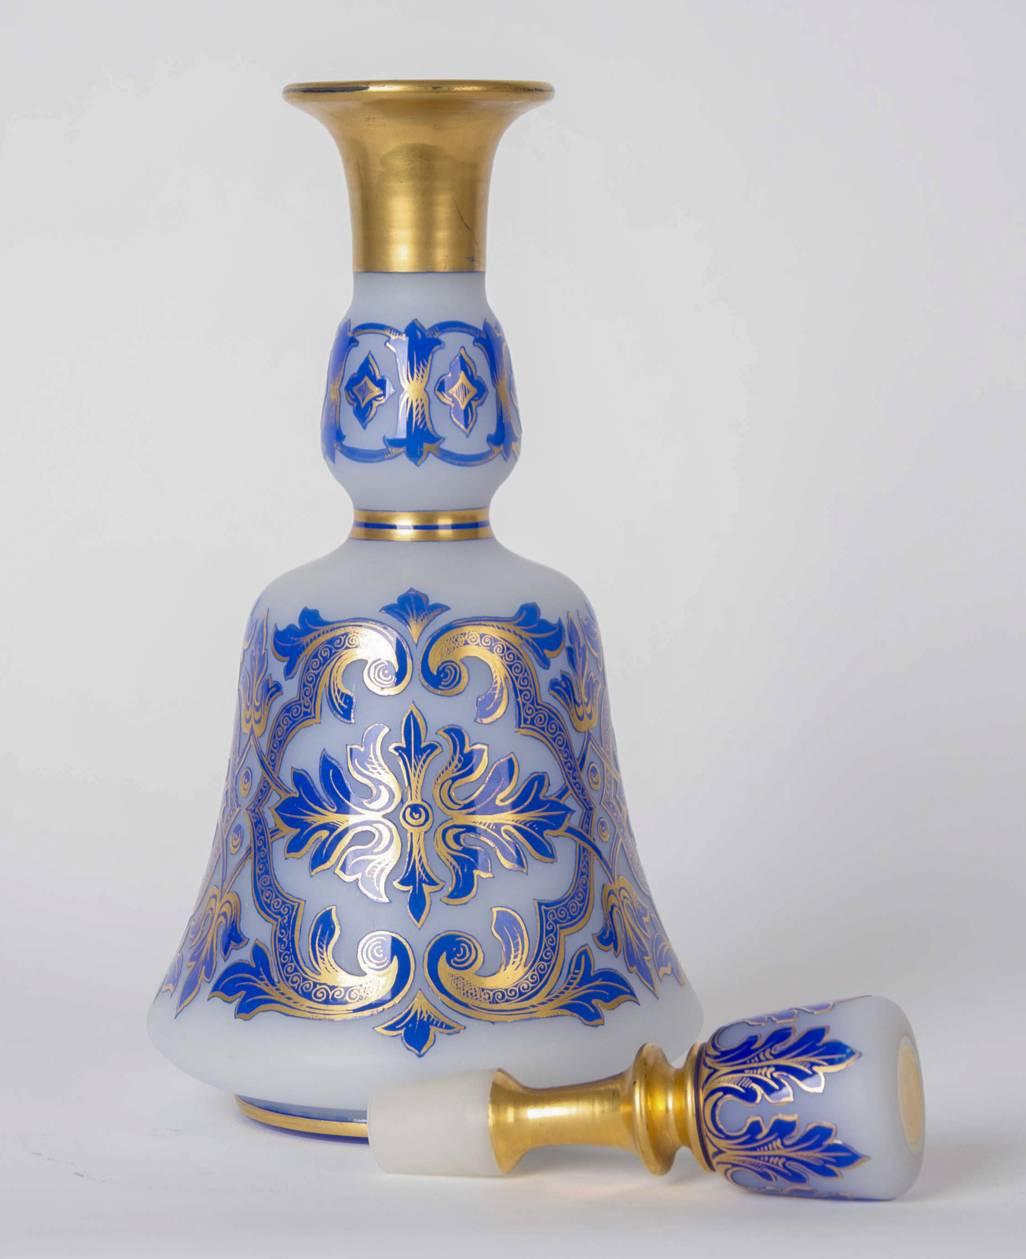 This antique luxury drinking set dates from the late 19th Century and consists of four pieces: a decanter with a stopper, a bon-bon jar with a cover and two goblets. The goblets have gilt stems and rims and feature a foliate blue glass overlay